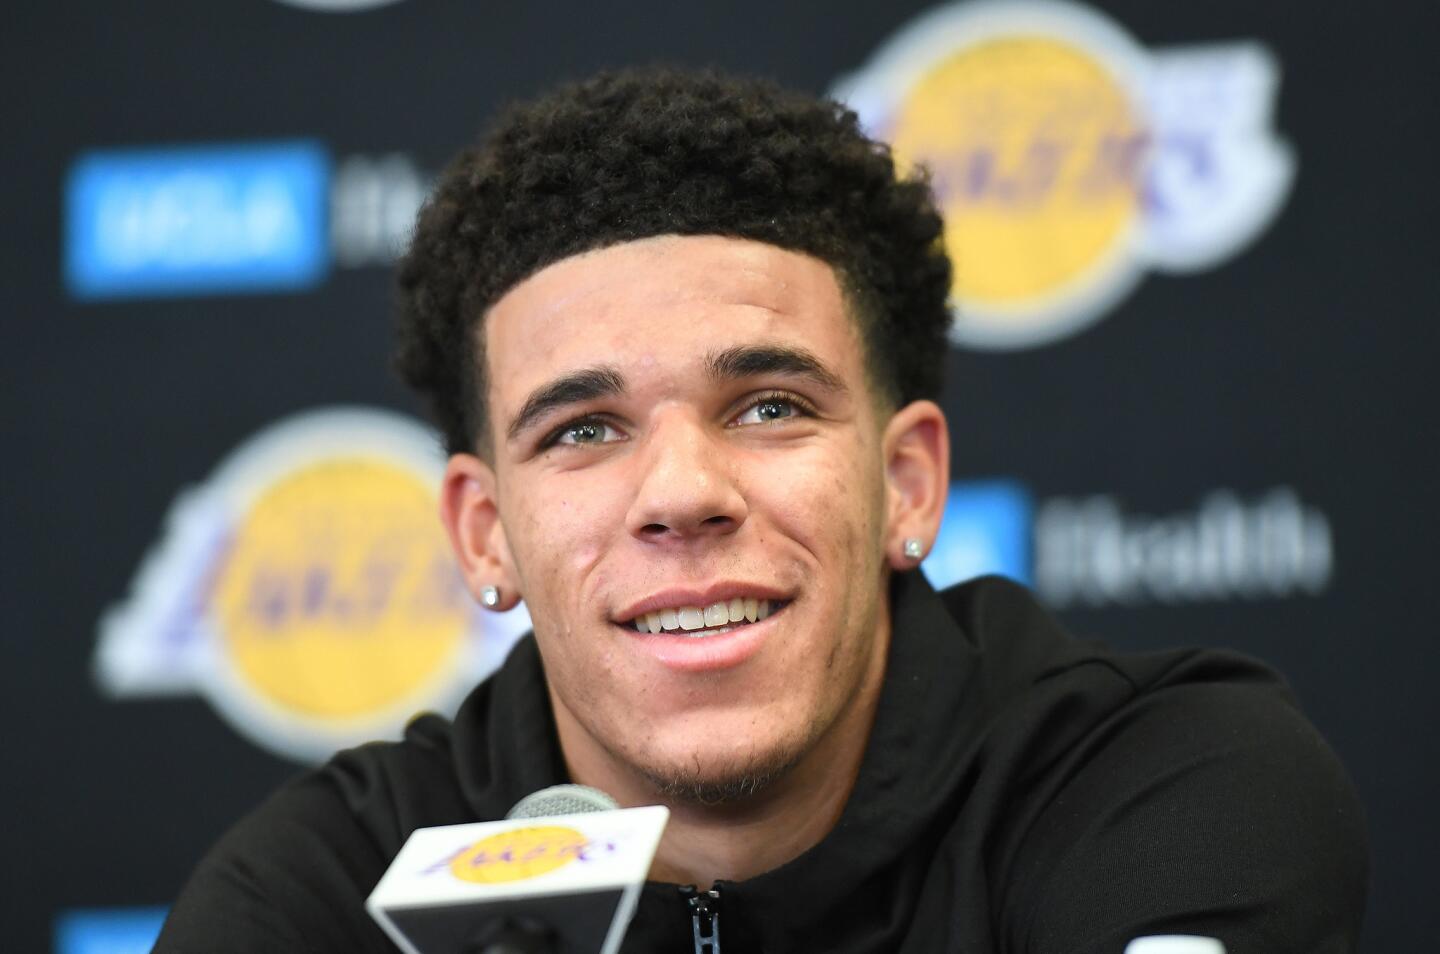 Lakers first-round draft pick Lonzo Ball addresses the media during his introductory news conference at the team's training facility in El Segundo.